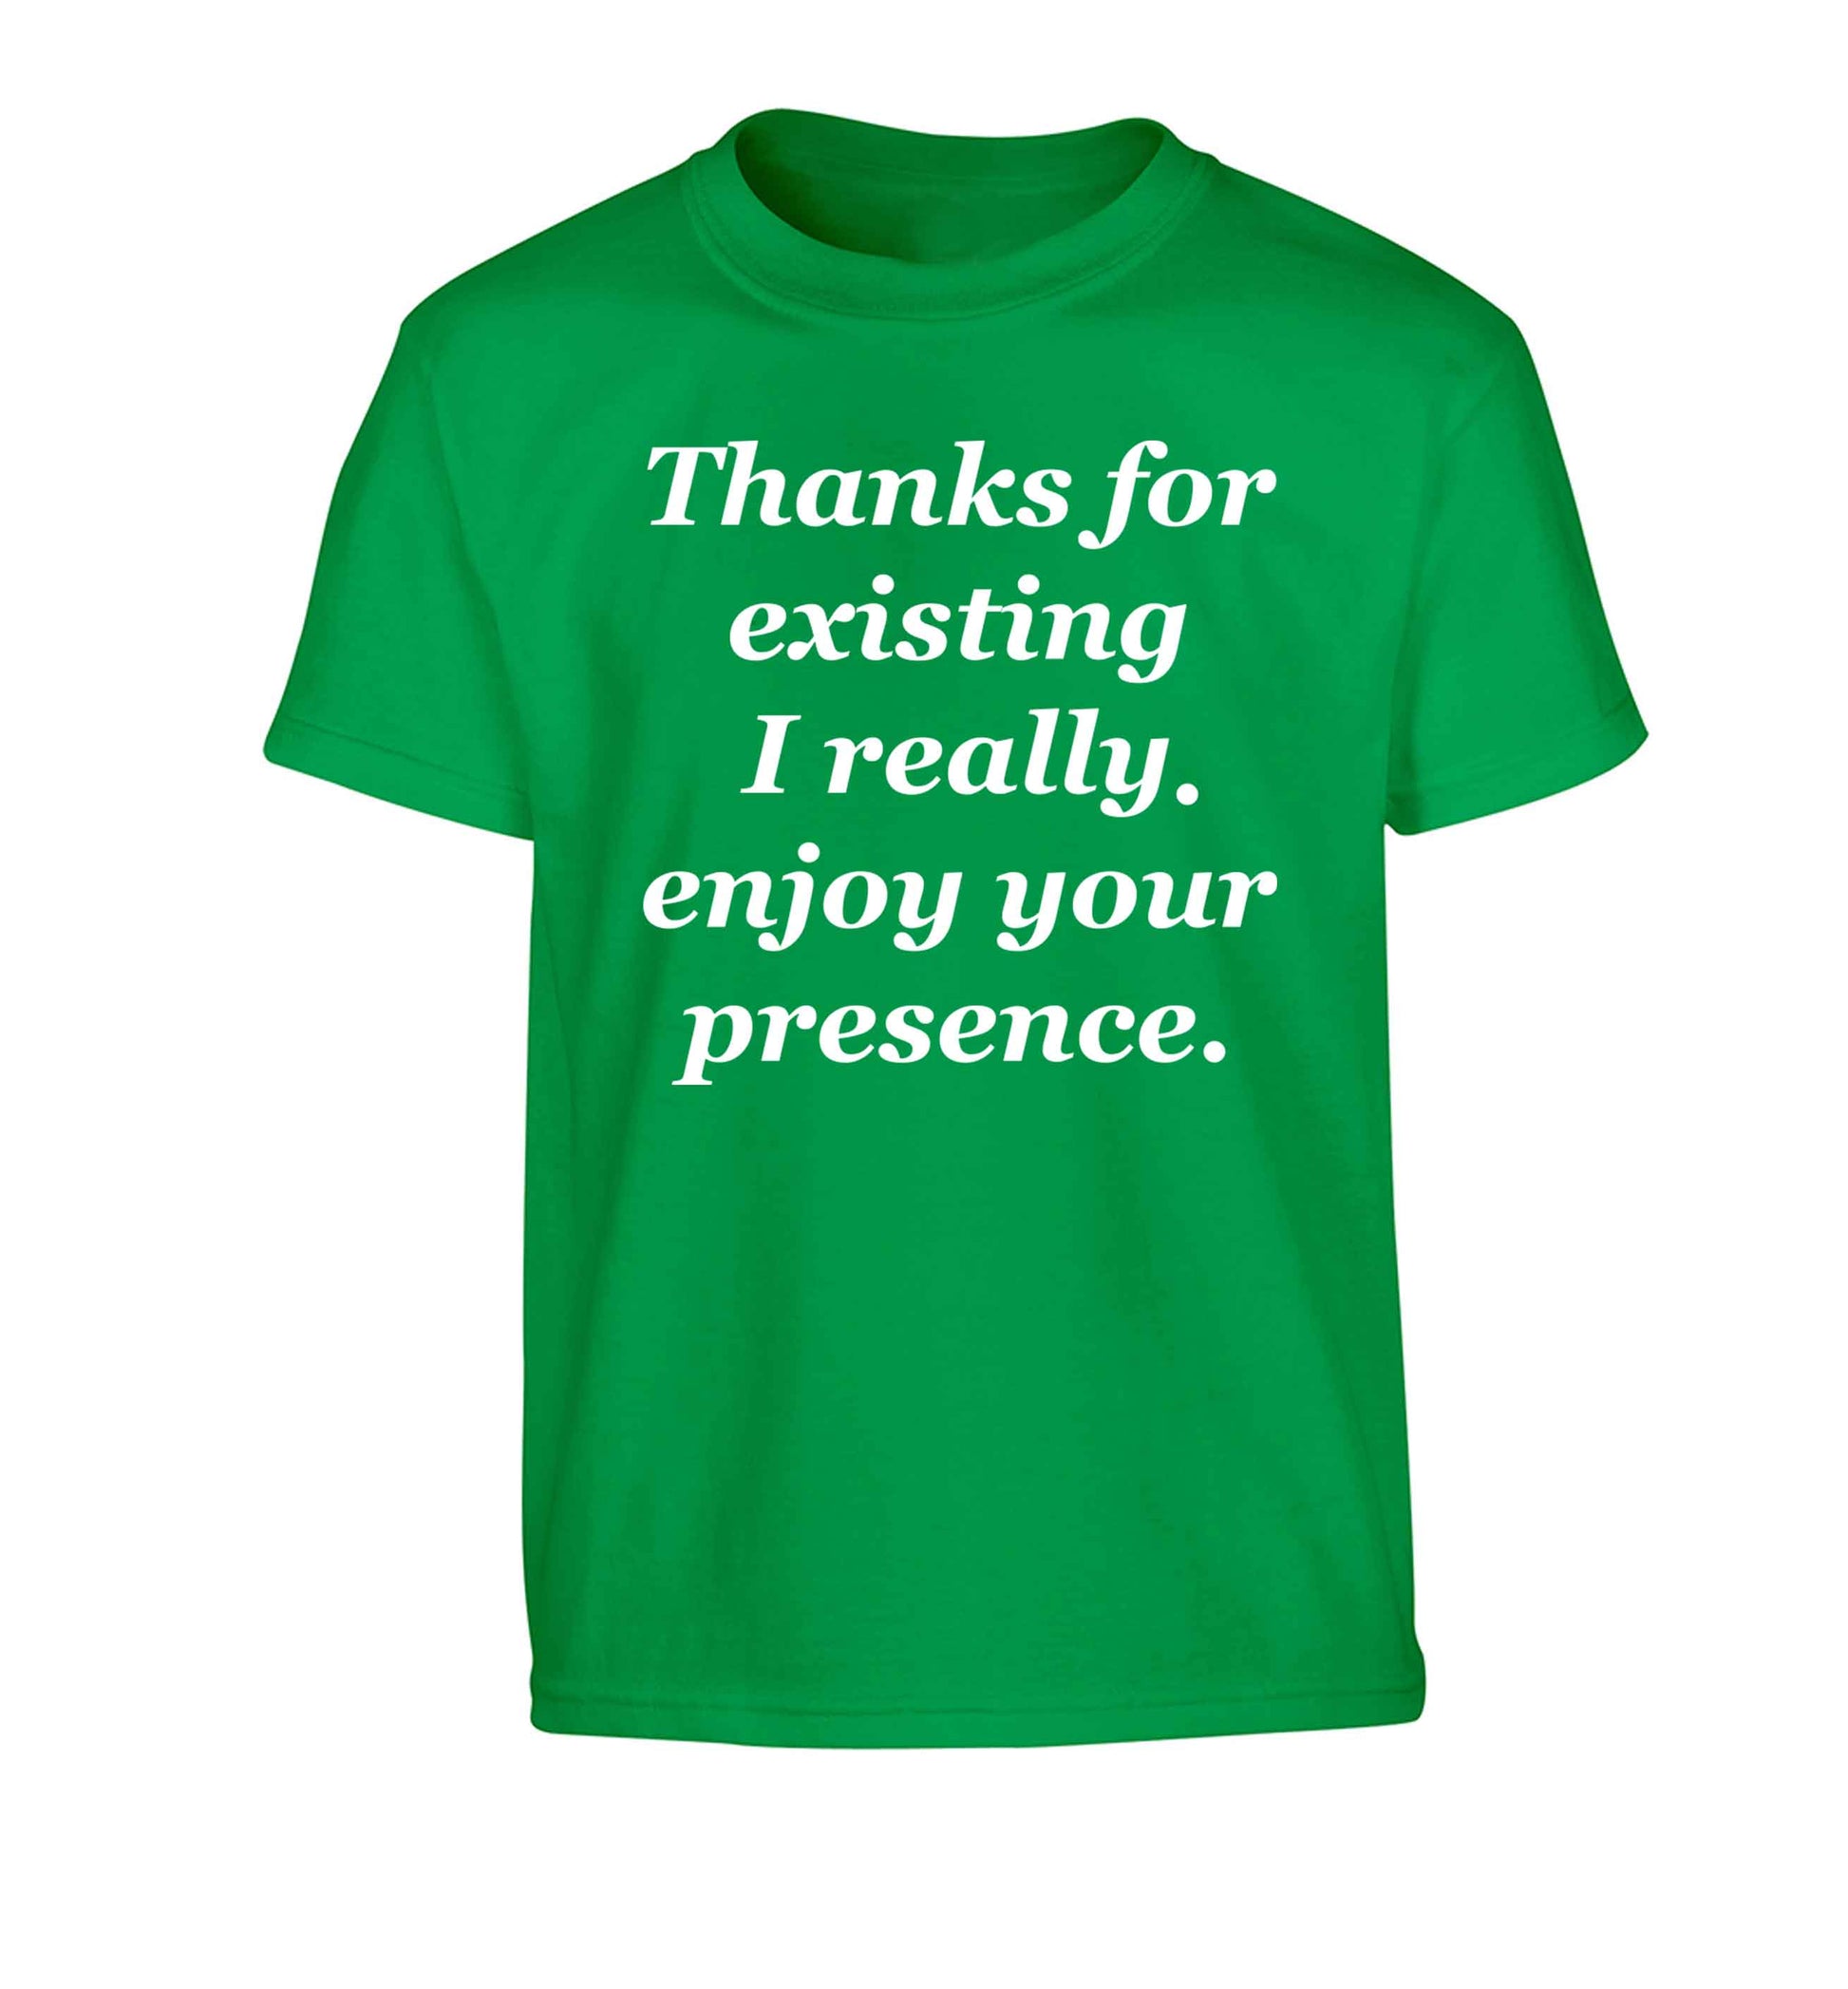 Thanks for existing I really enjoy your presence Children's green Tshirt 12-13 Years